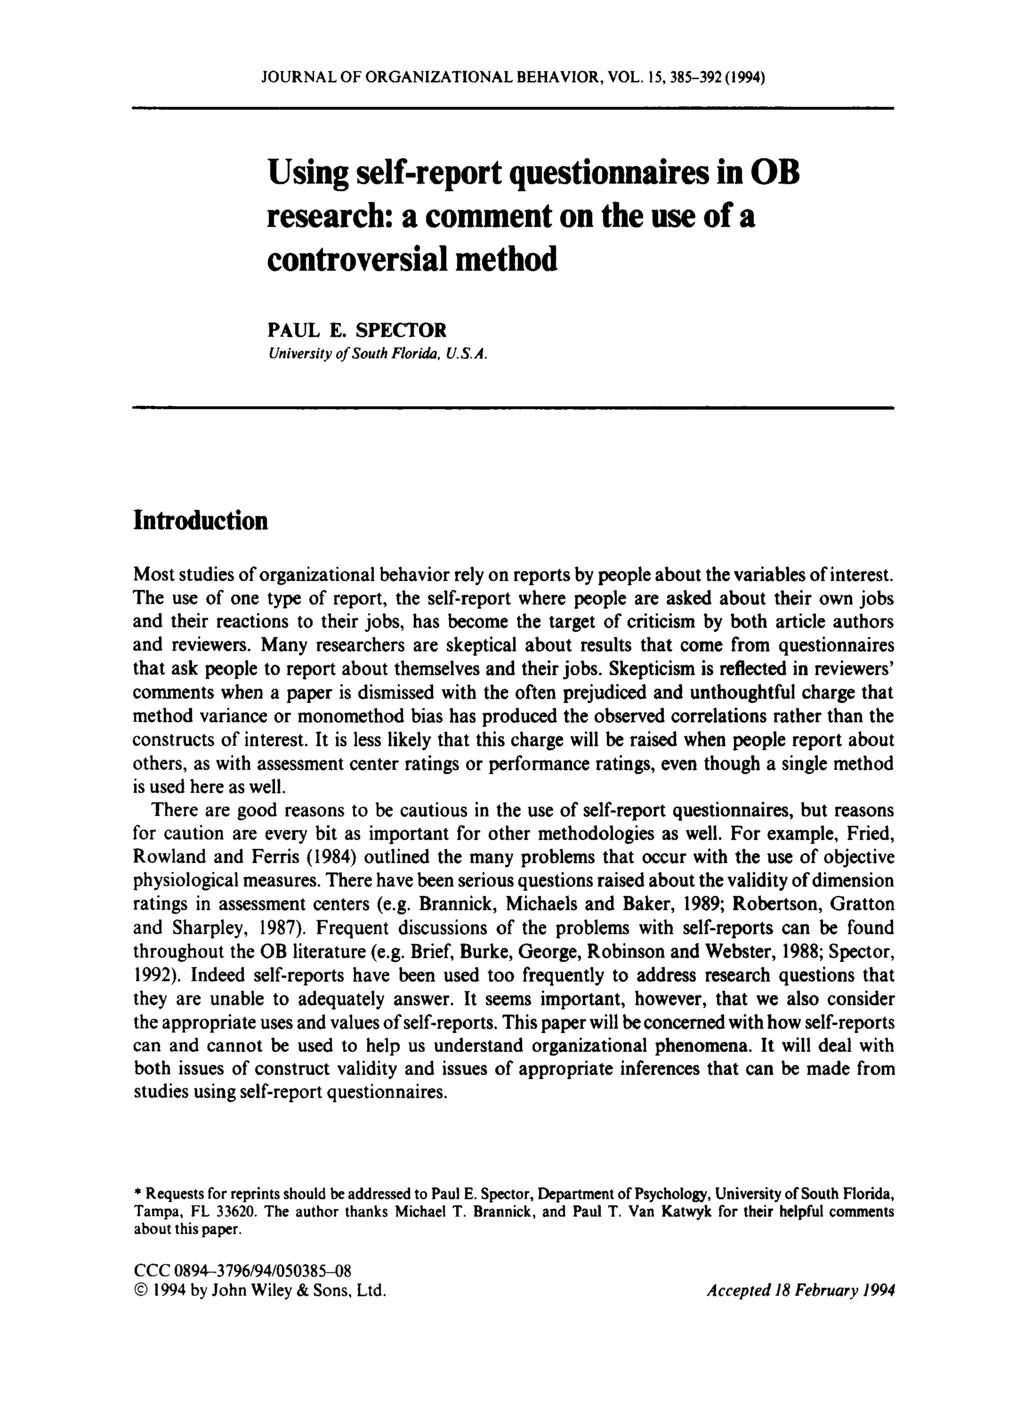 JOURNAL OF ORGANIZATIONAL BEHAVIOR, VOL. 15,385-392 (1994) Using self-report questionnaires in OB research: a comment on the use of a controversial method PAUL E.